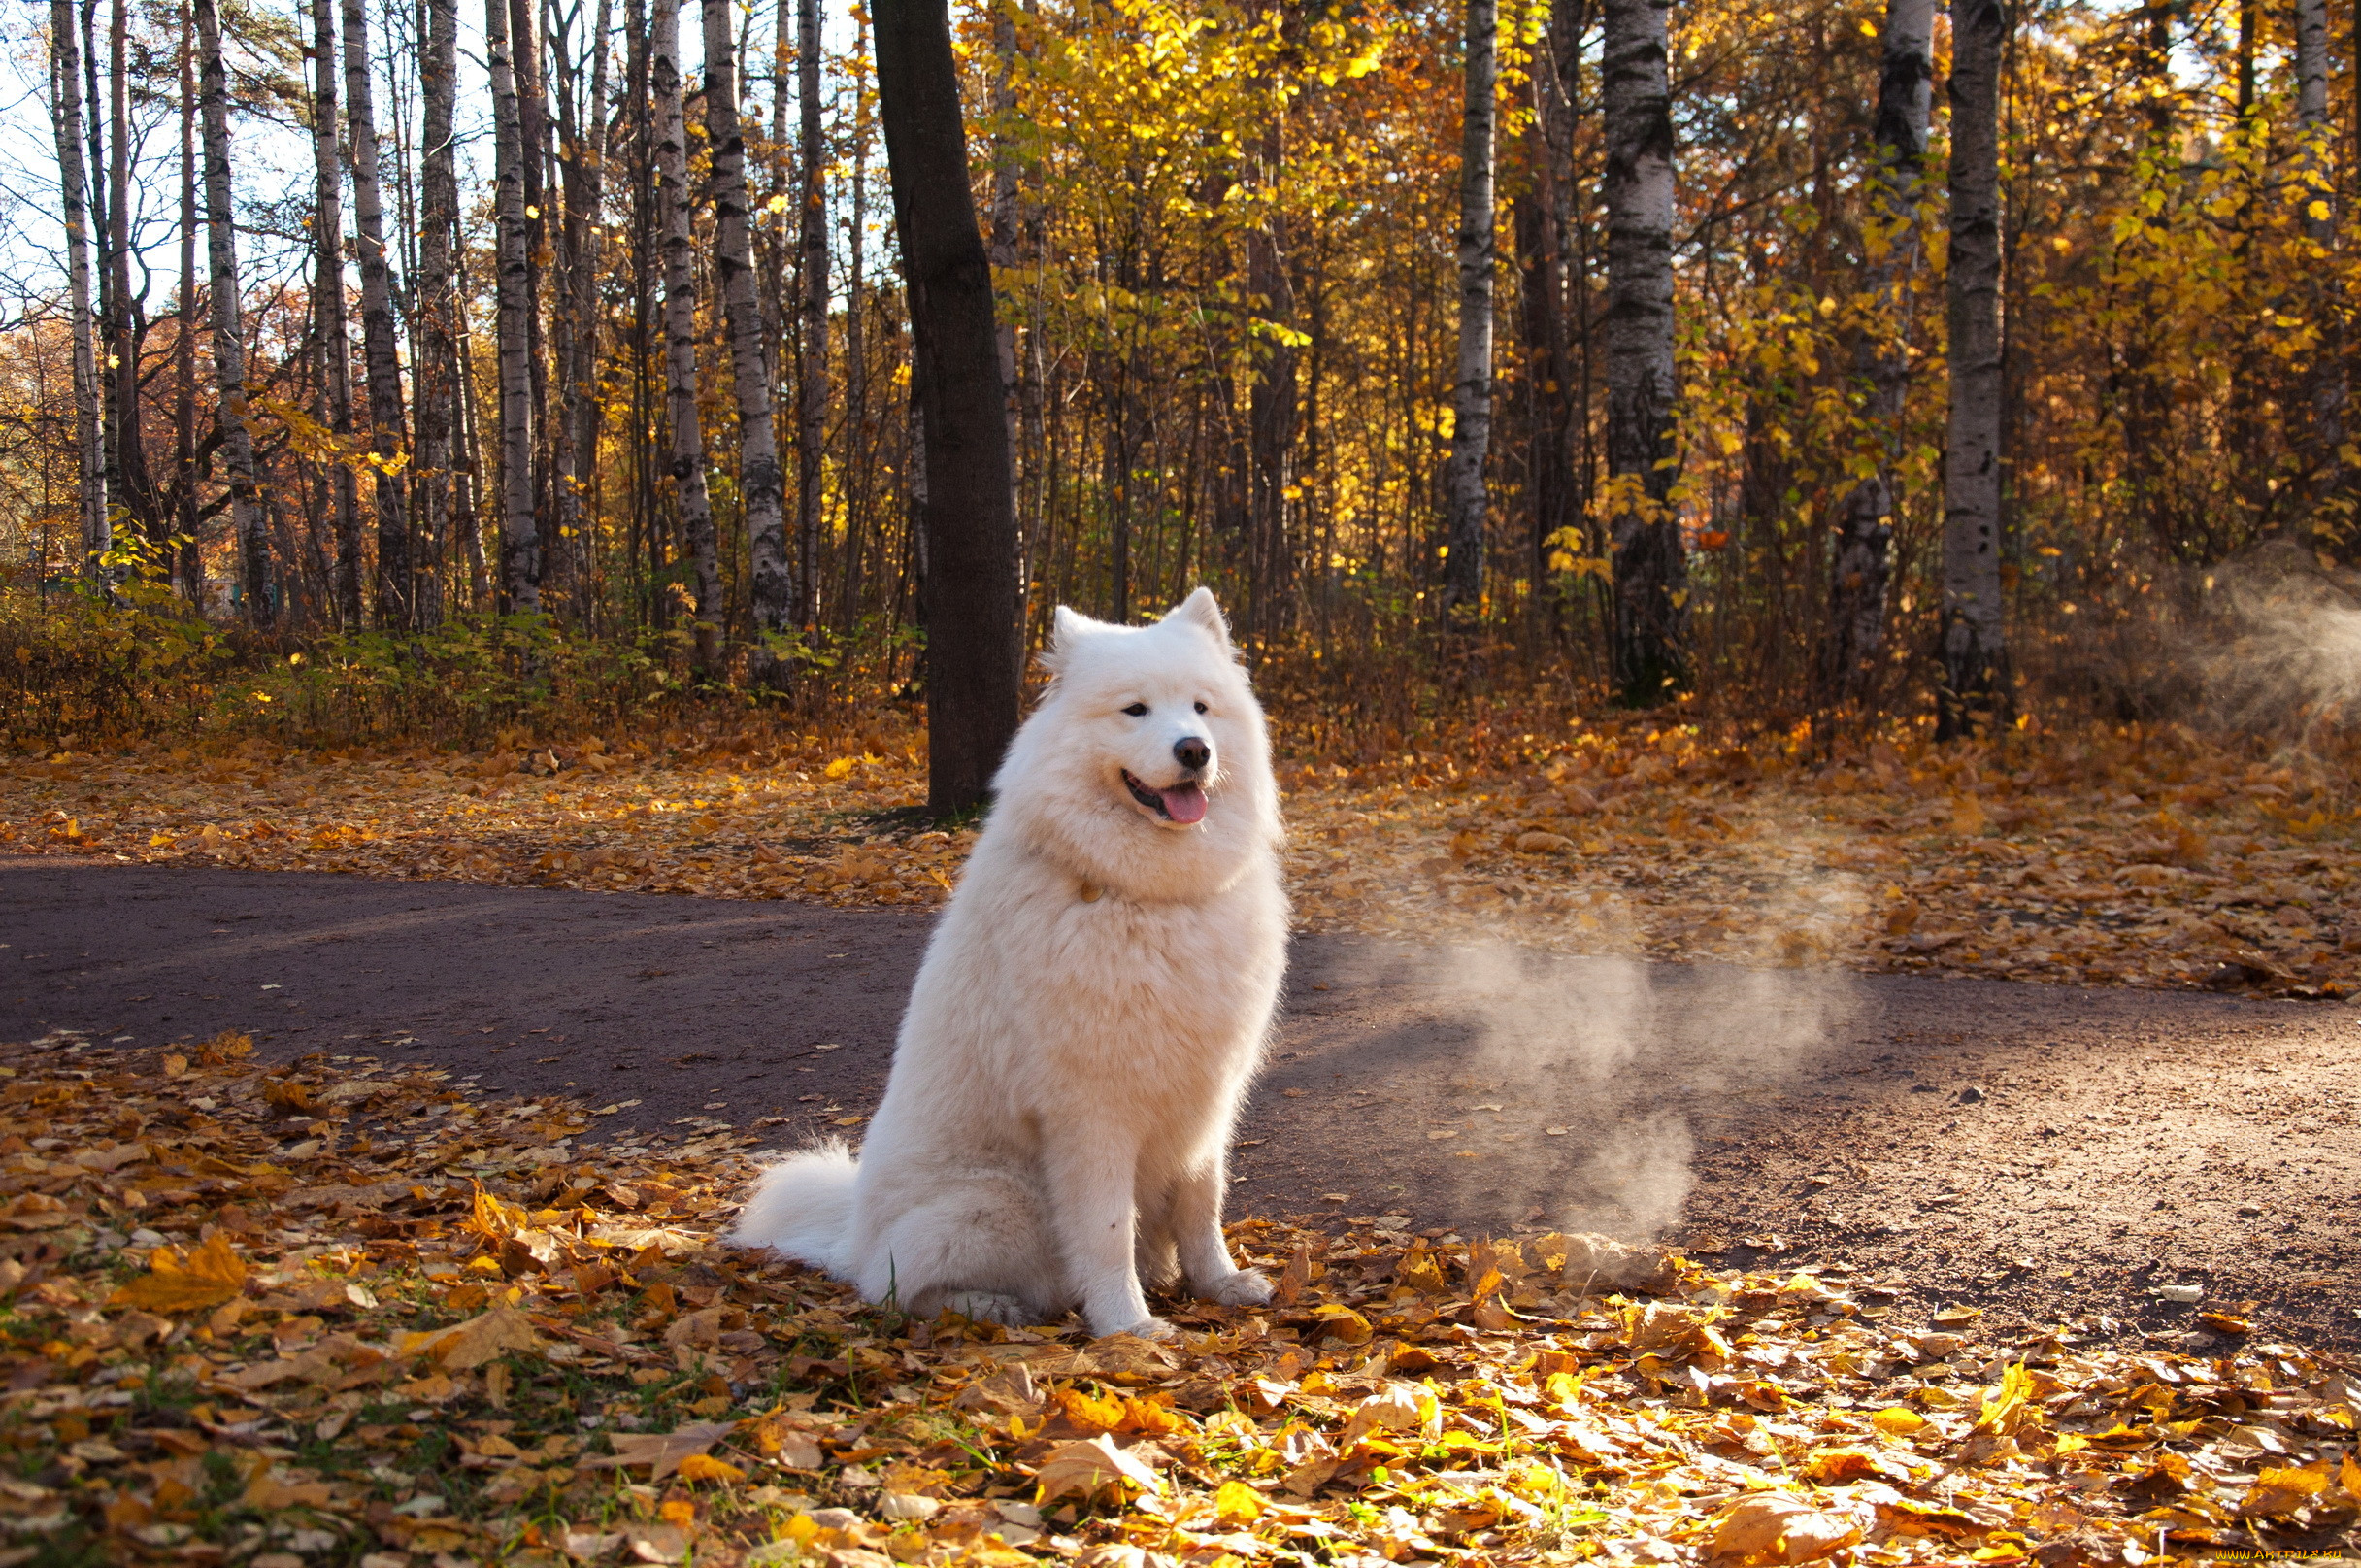 , , dogs, nature, parks, atumn